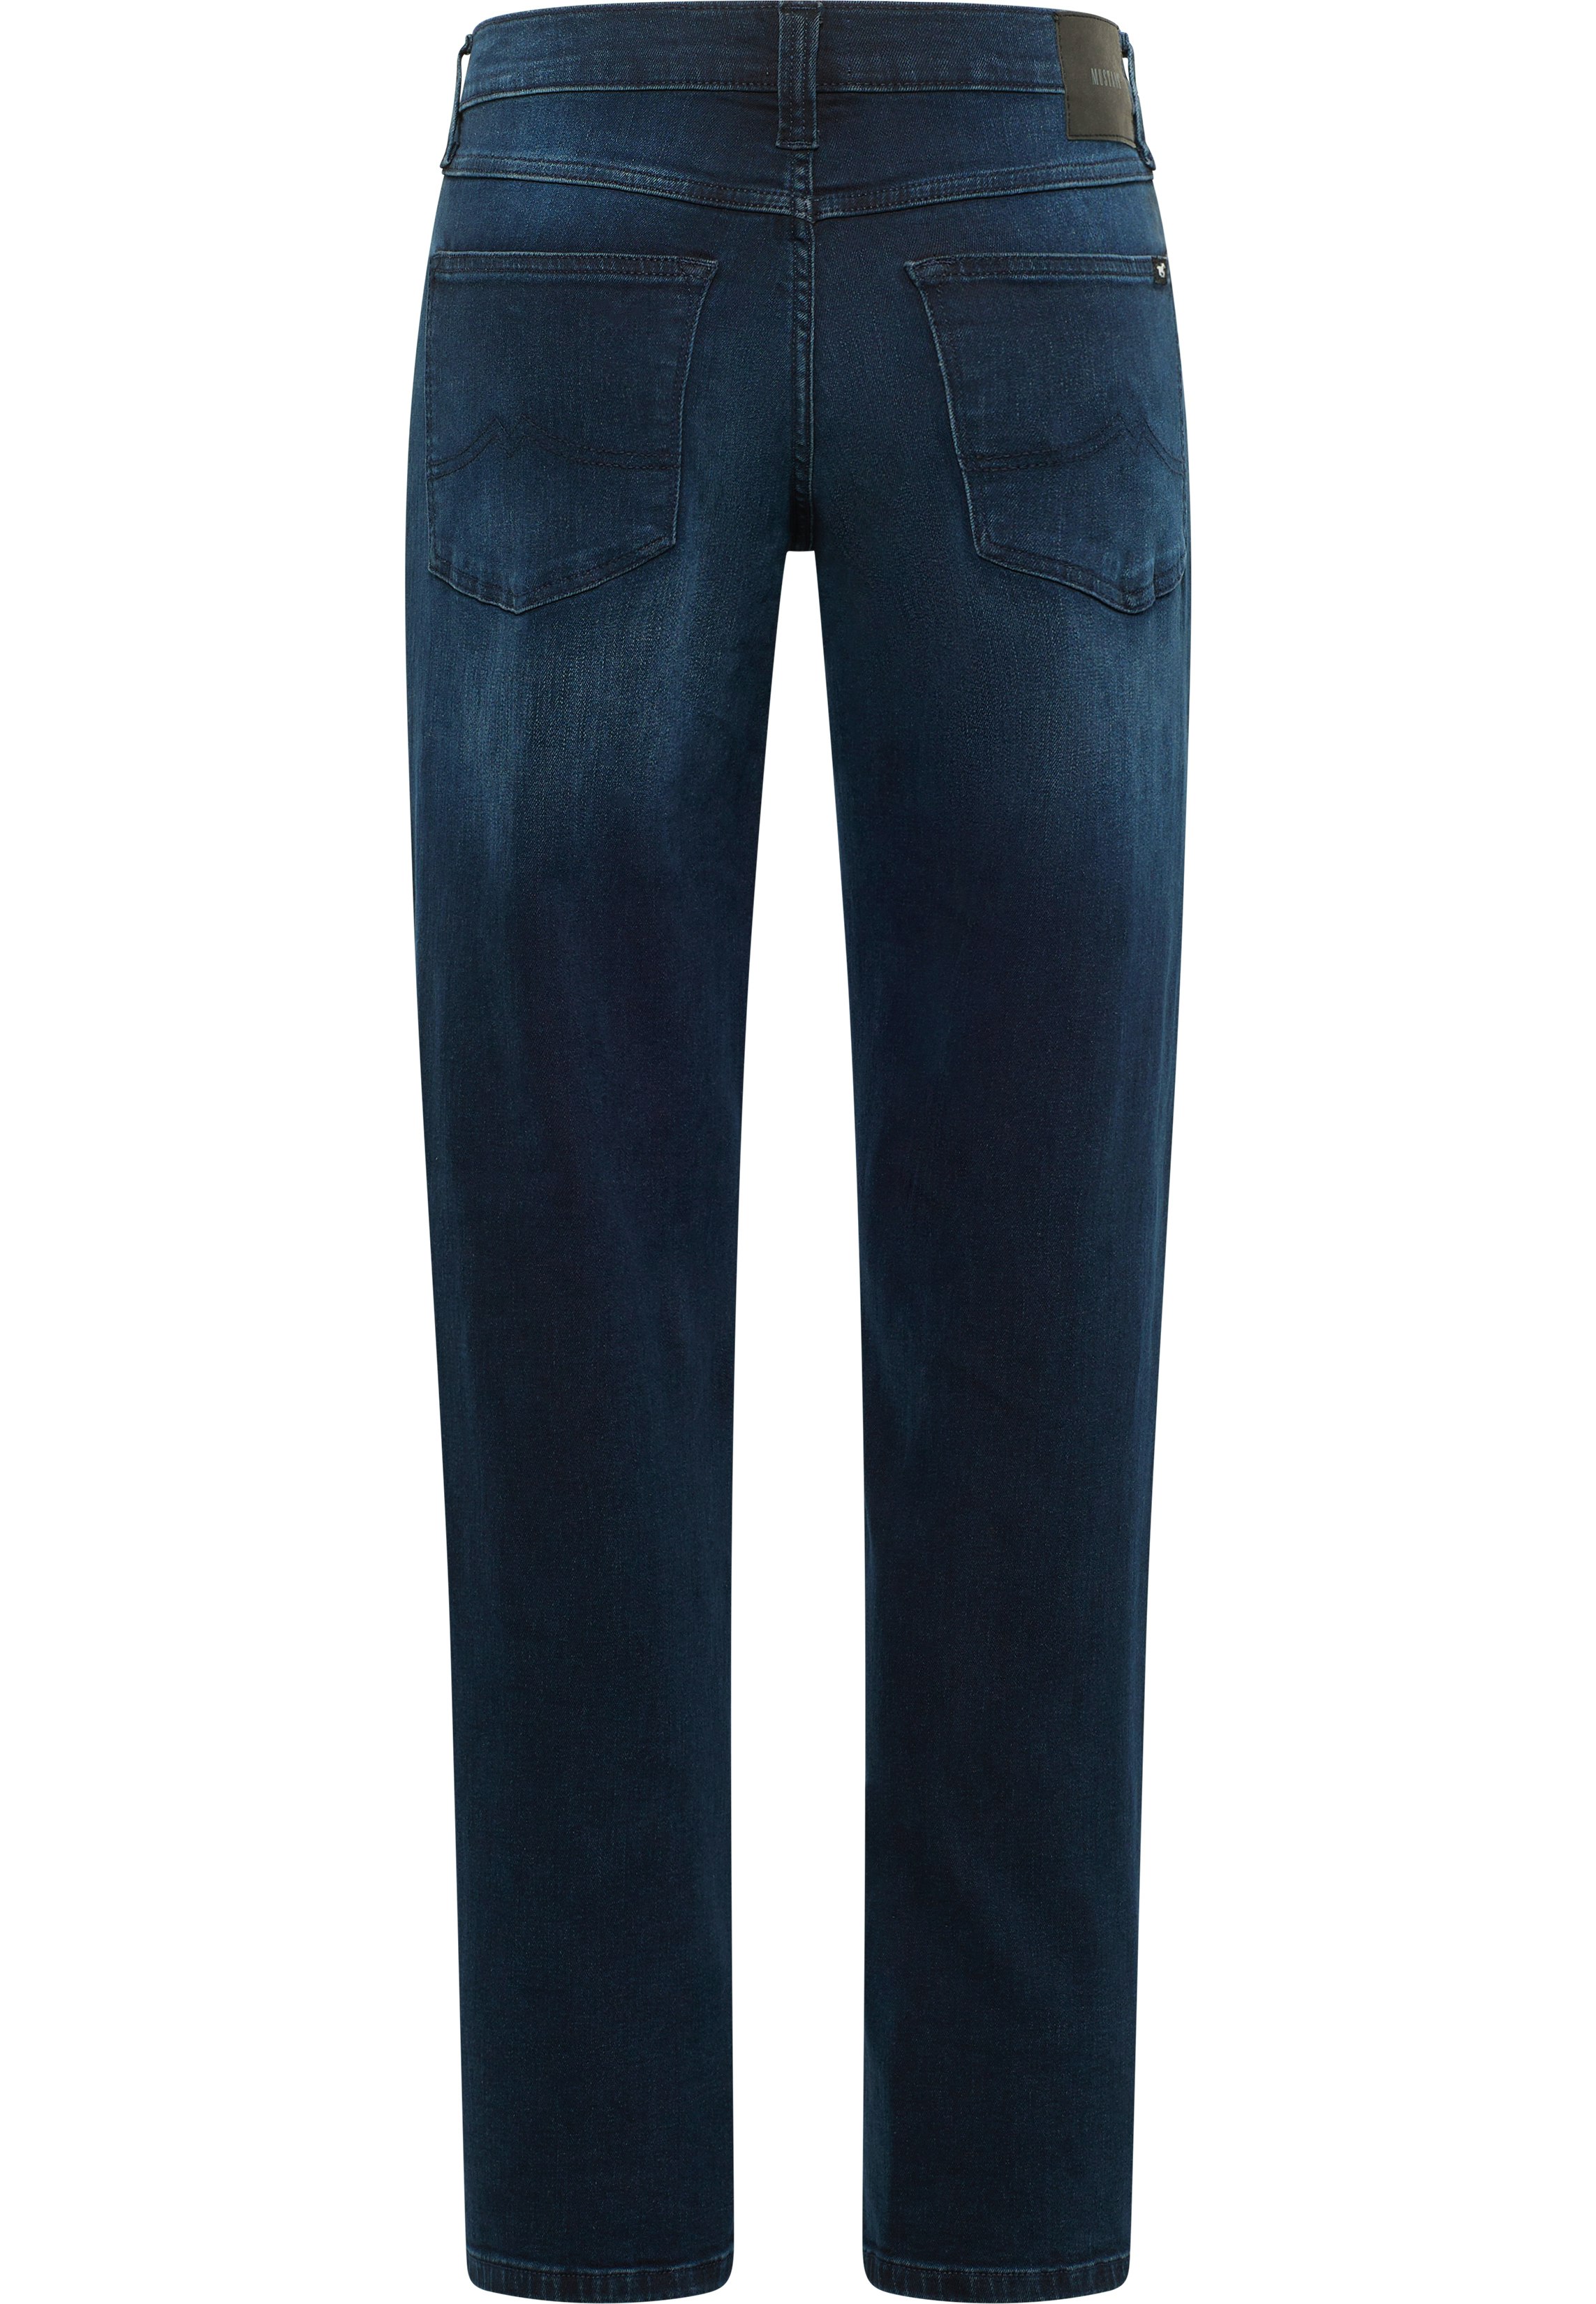 Mustang Jeans extra Straight blue Sur Big lang used in deep